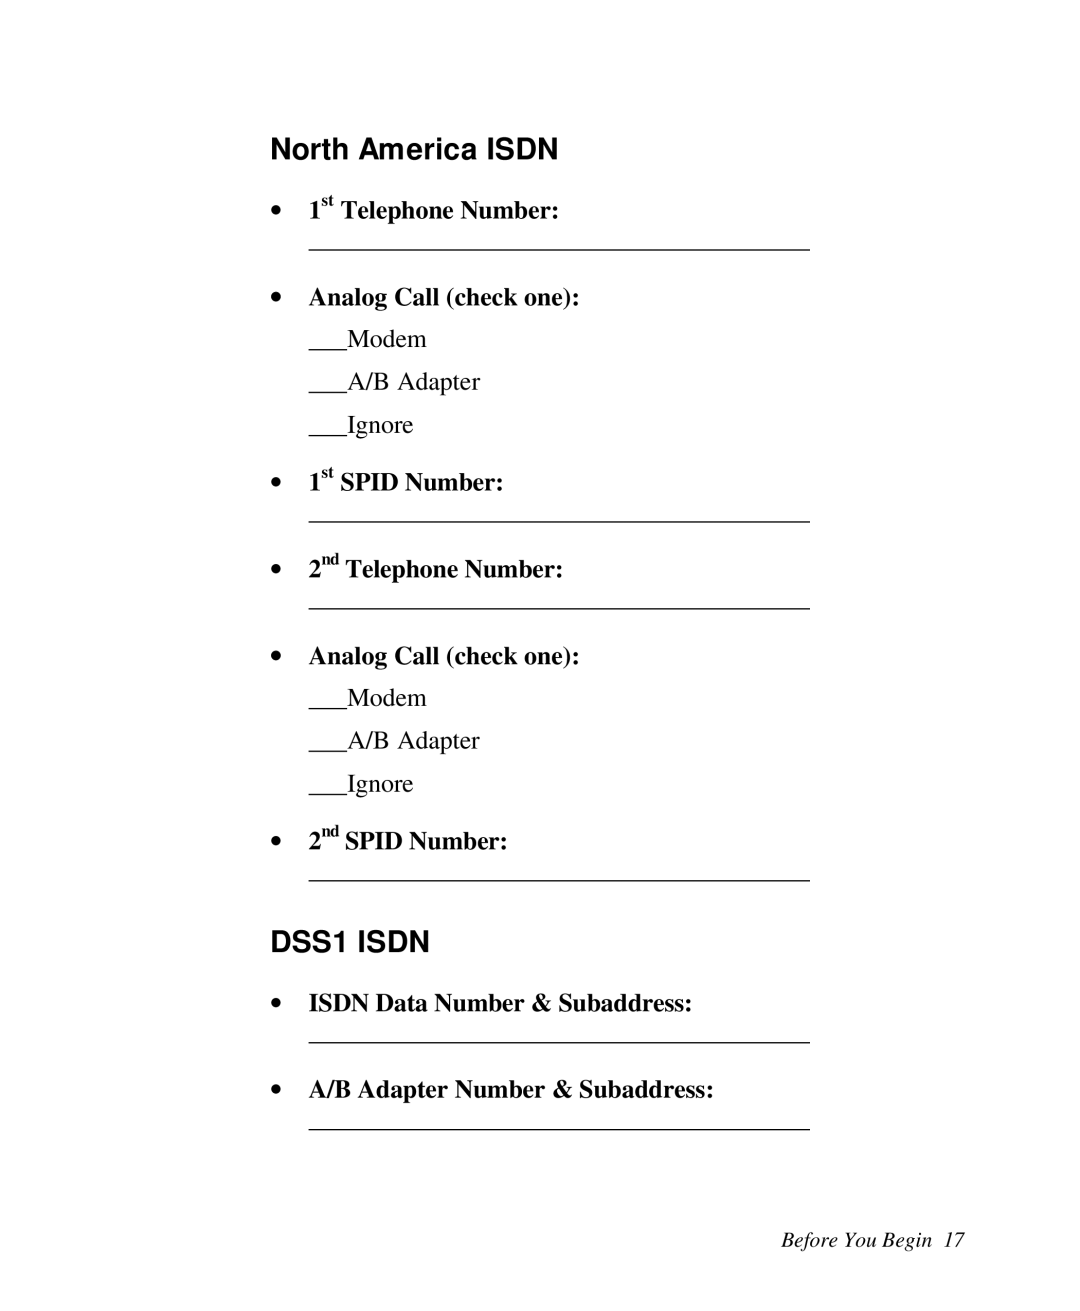 ZyXEL Communications 2864I user manual North America ISDN, DSS1 ISDN, ∙ 1st Telephone Number, ∙ Analog Call check one 